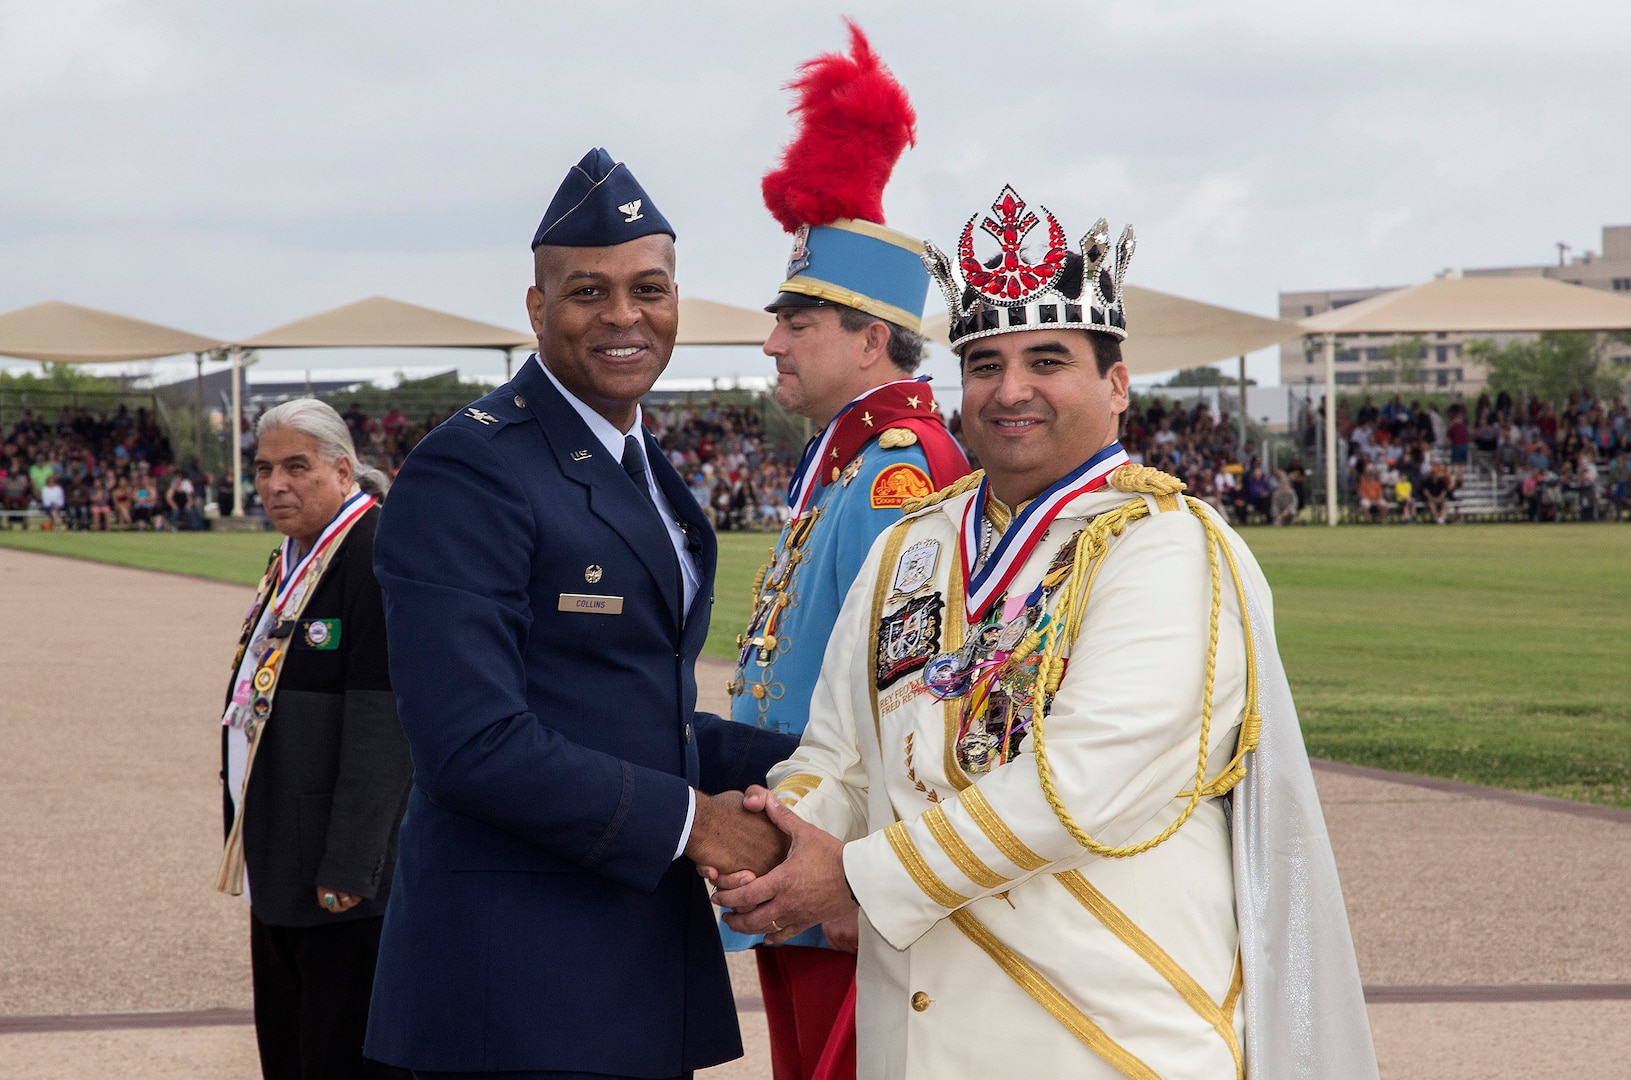 Col. Roy Collins, 37th Training Wing commander, presents a gift to 2017 Fiesta Royalty, Fernando Reyes of the Rey Feo Consejo Educational Foundation, April 21, 2017, at Joint Base San Antonio-Lackland, Texas. The full-scale Basic Military Training Graduation Parade is the only military graduation incorporated into Fiesta San Antonio, the city's 10-day celebration to honor the memory of the heroes of the Alamo and the Battle of San Jacinto. Over the past century, Fiesta has grown into a celebration of San Antonio's rich and diverse cultures. Military representatives from throughout San Antonio participate in receptions, parades, pilgrimages and memorials. (U.S. Air Force photo by Johnny Saldivar)